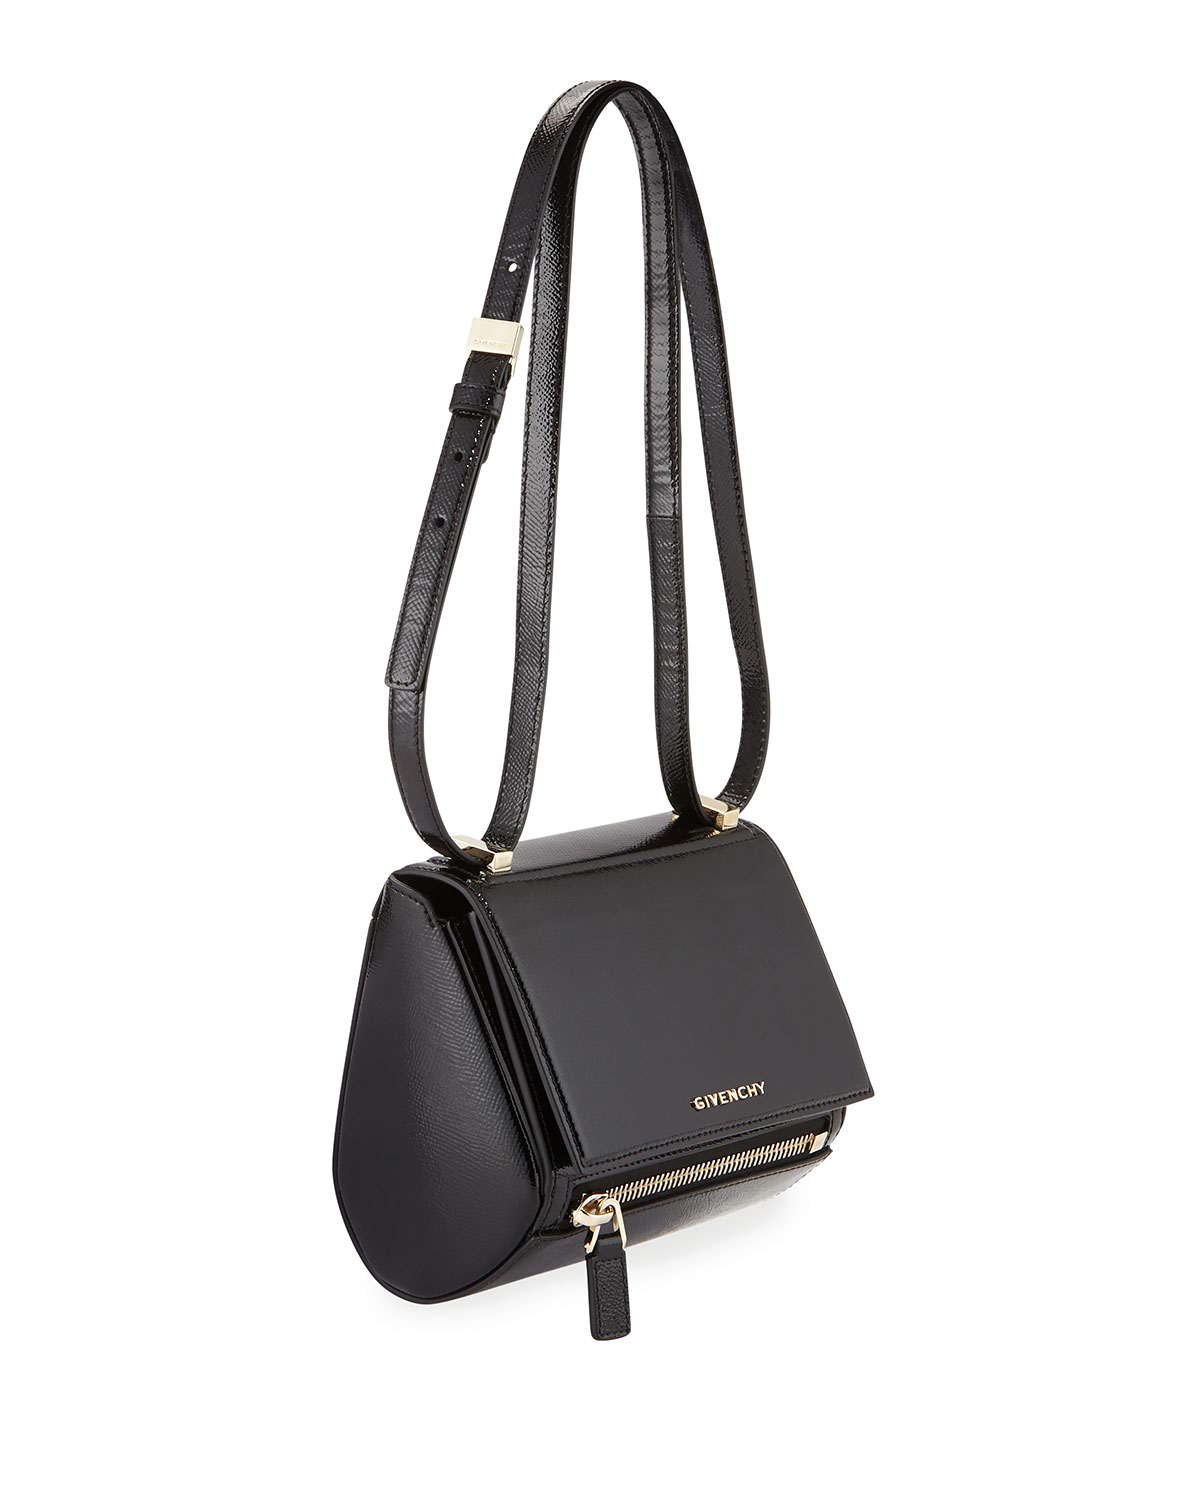 Lyst - Givenchy Nightingale Small Cross-Body Bag in Black